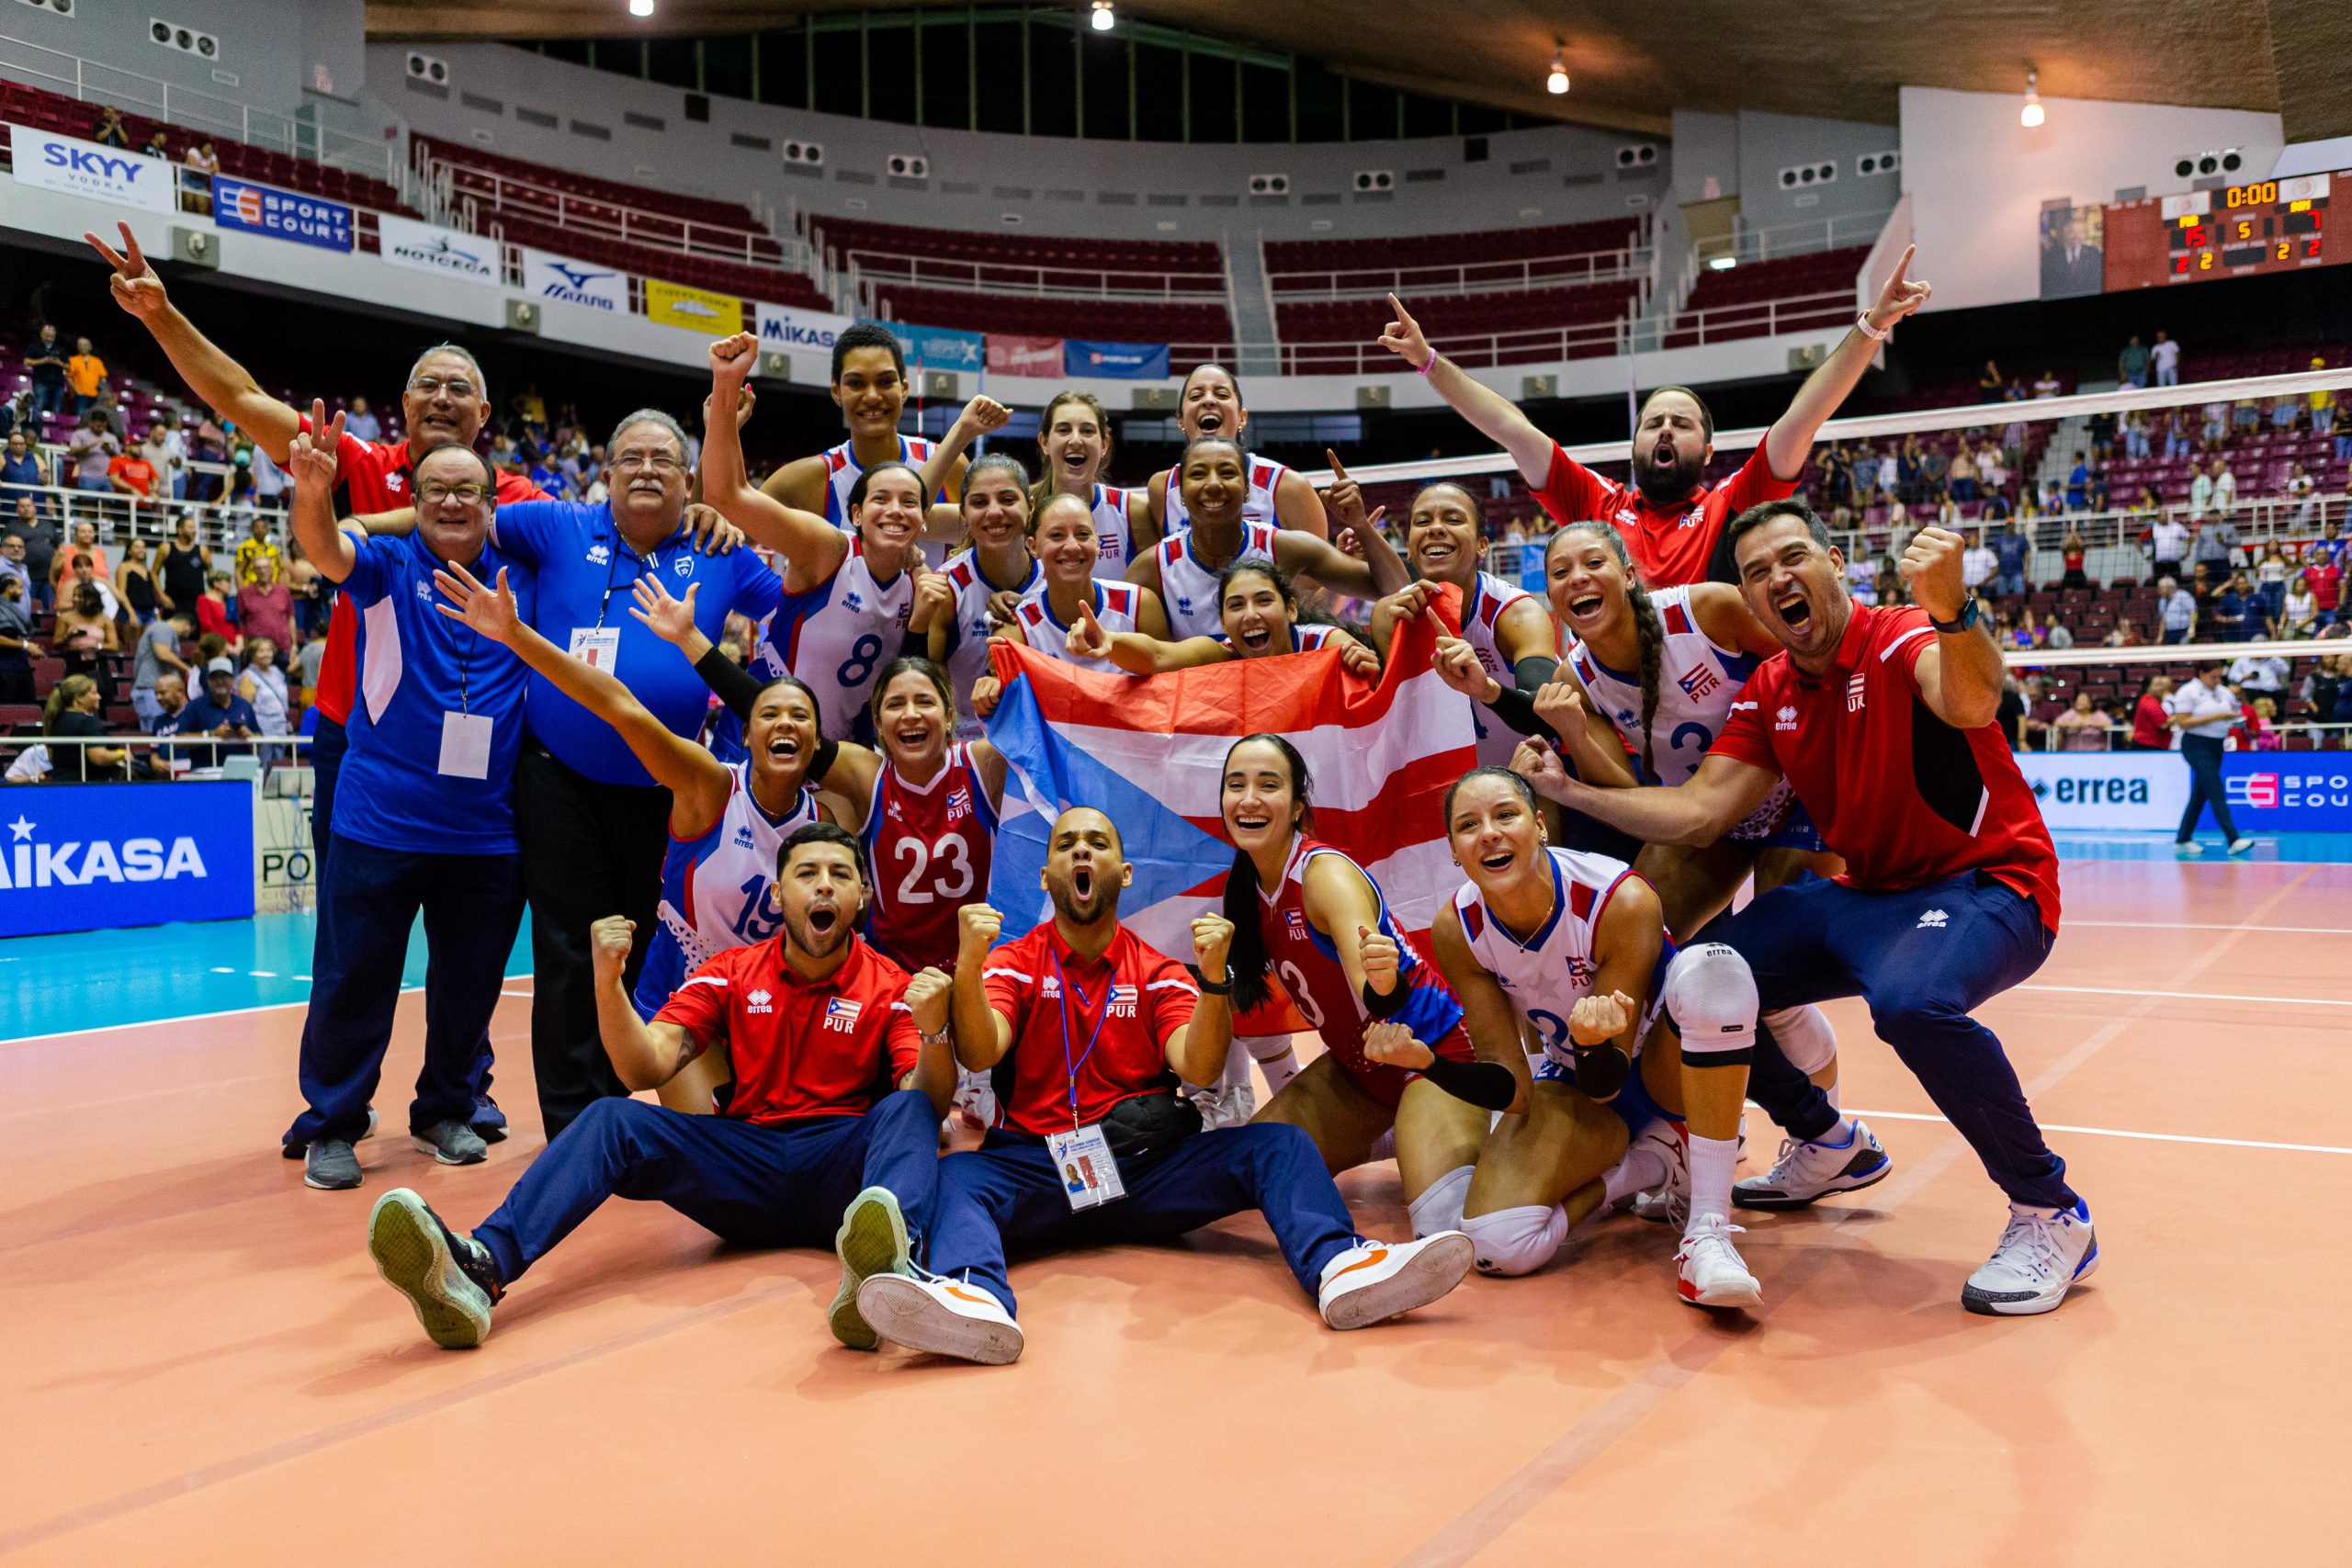 Puerto Rico for the gold!